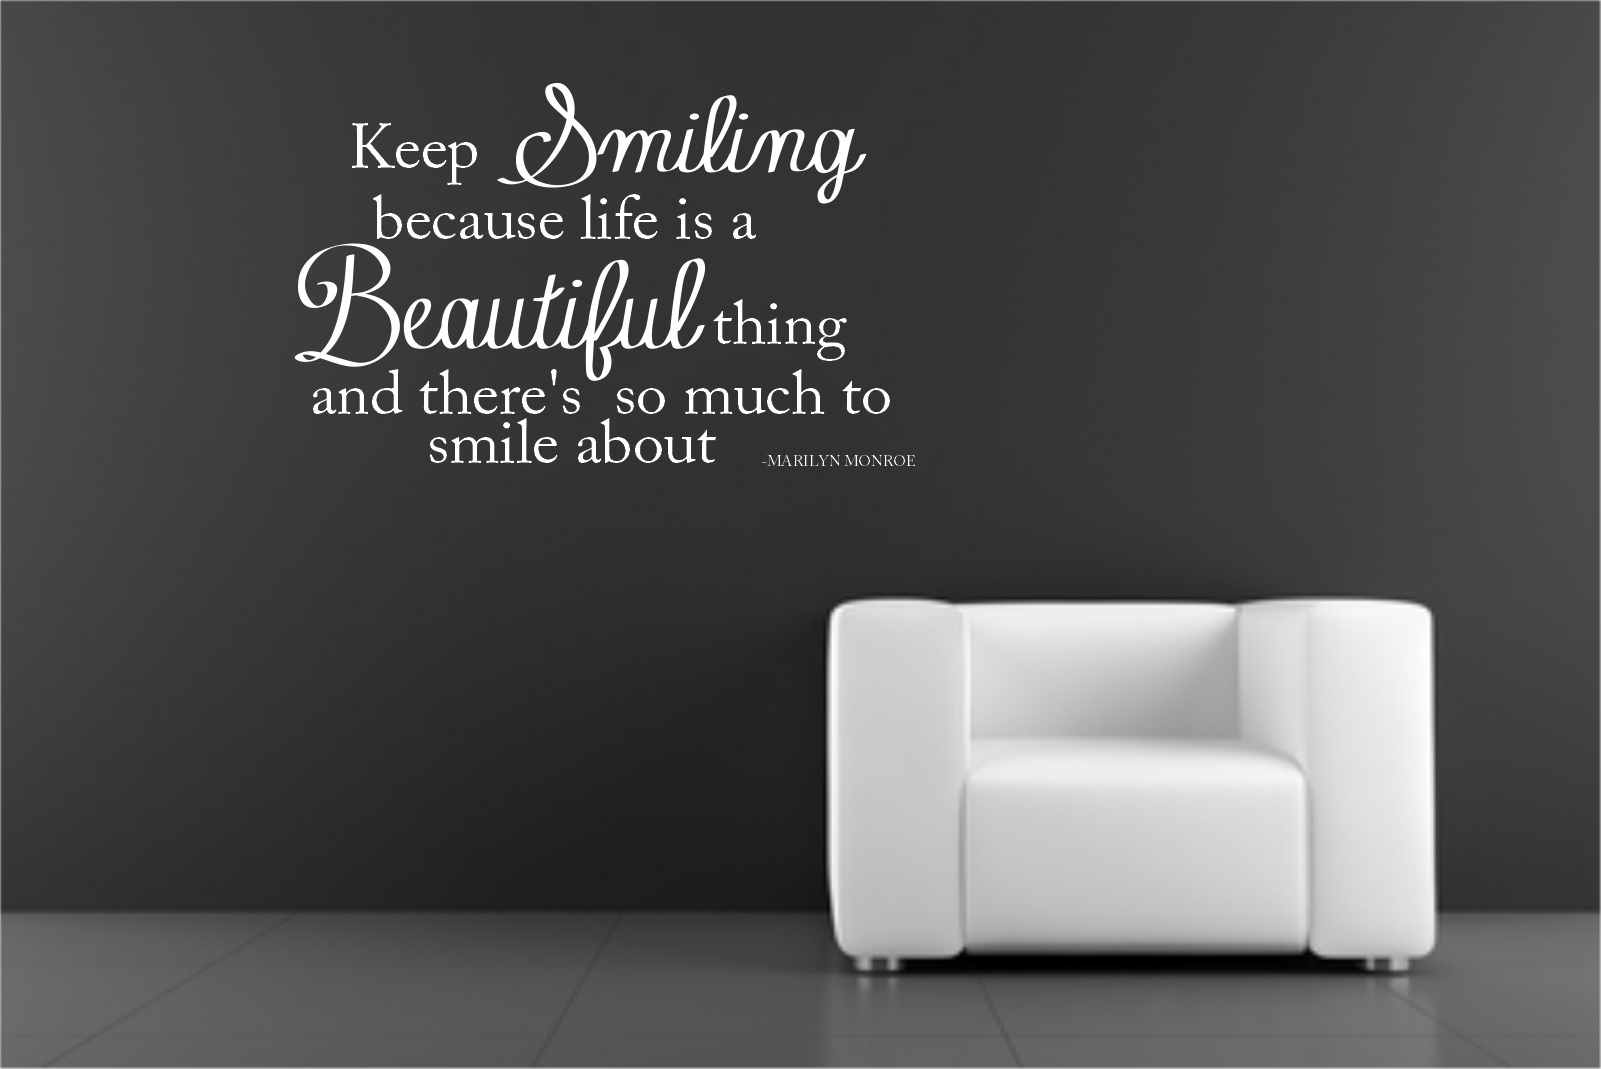 smile quotes keep smiling marilyn monroe quote p